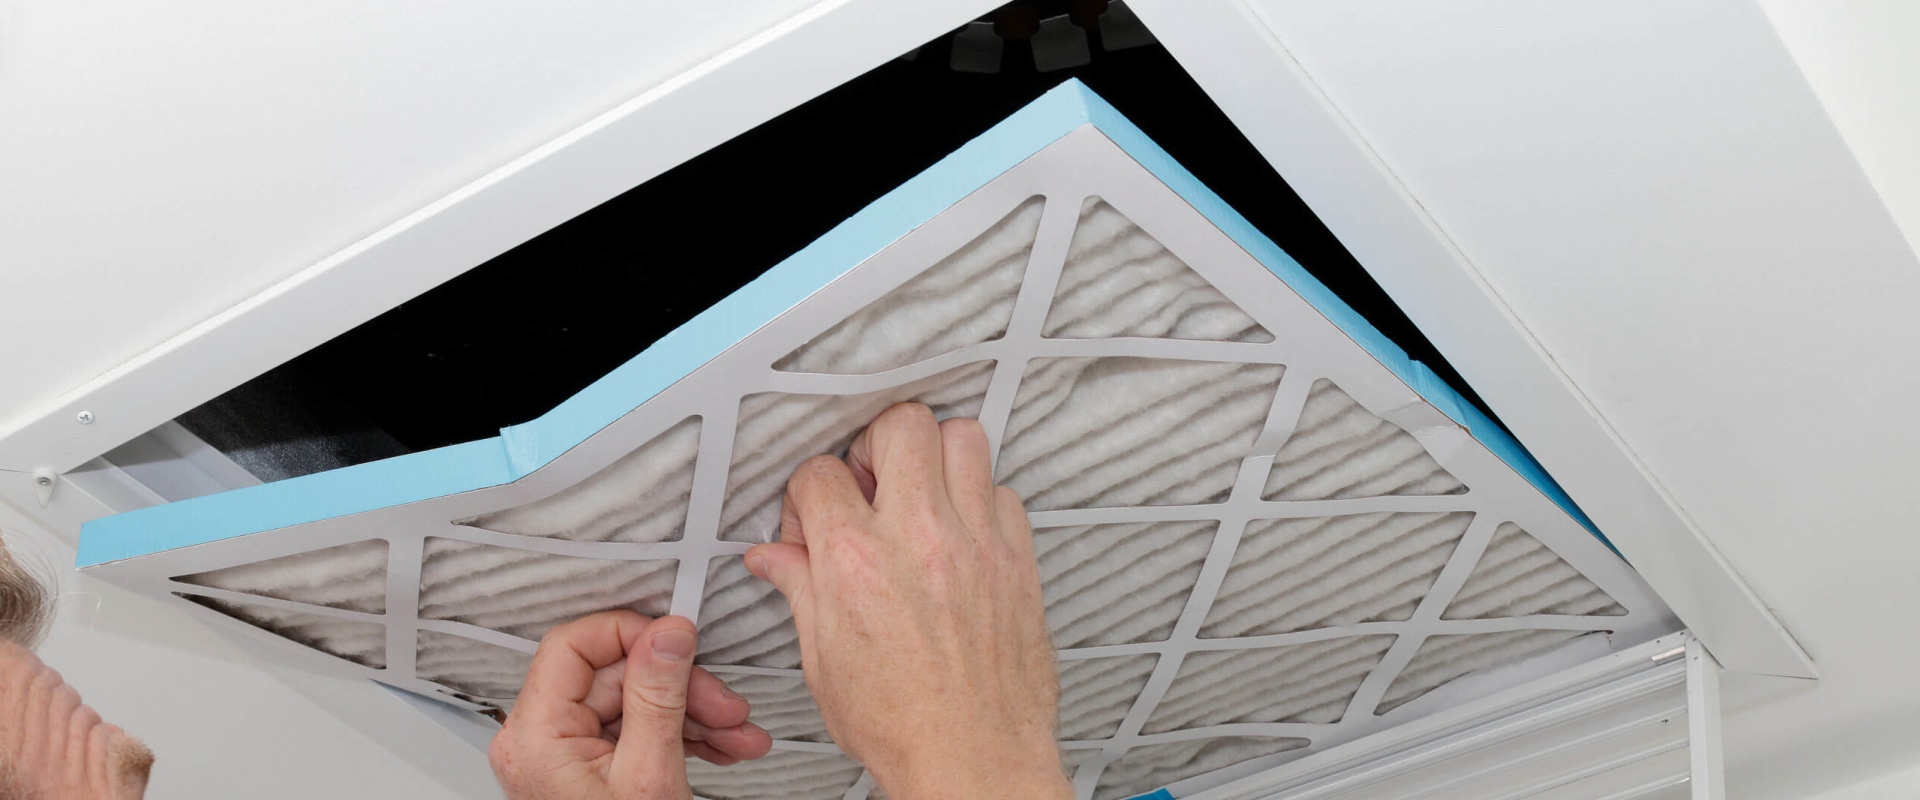 Is a MERV 13 Air Filter the Best Choice for Residential Use?